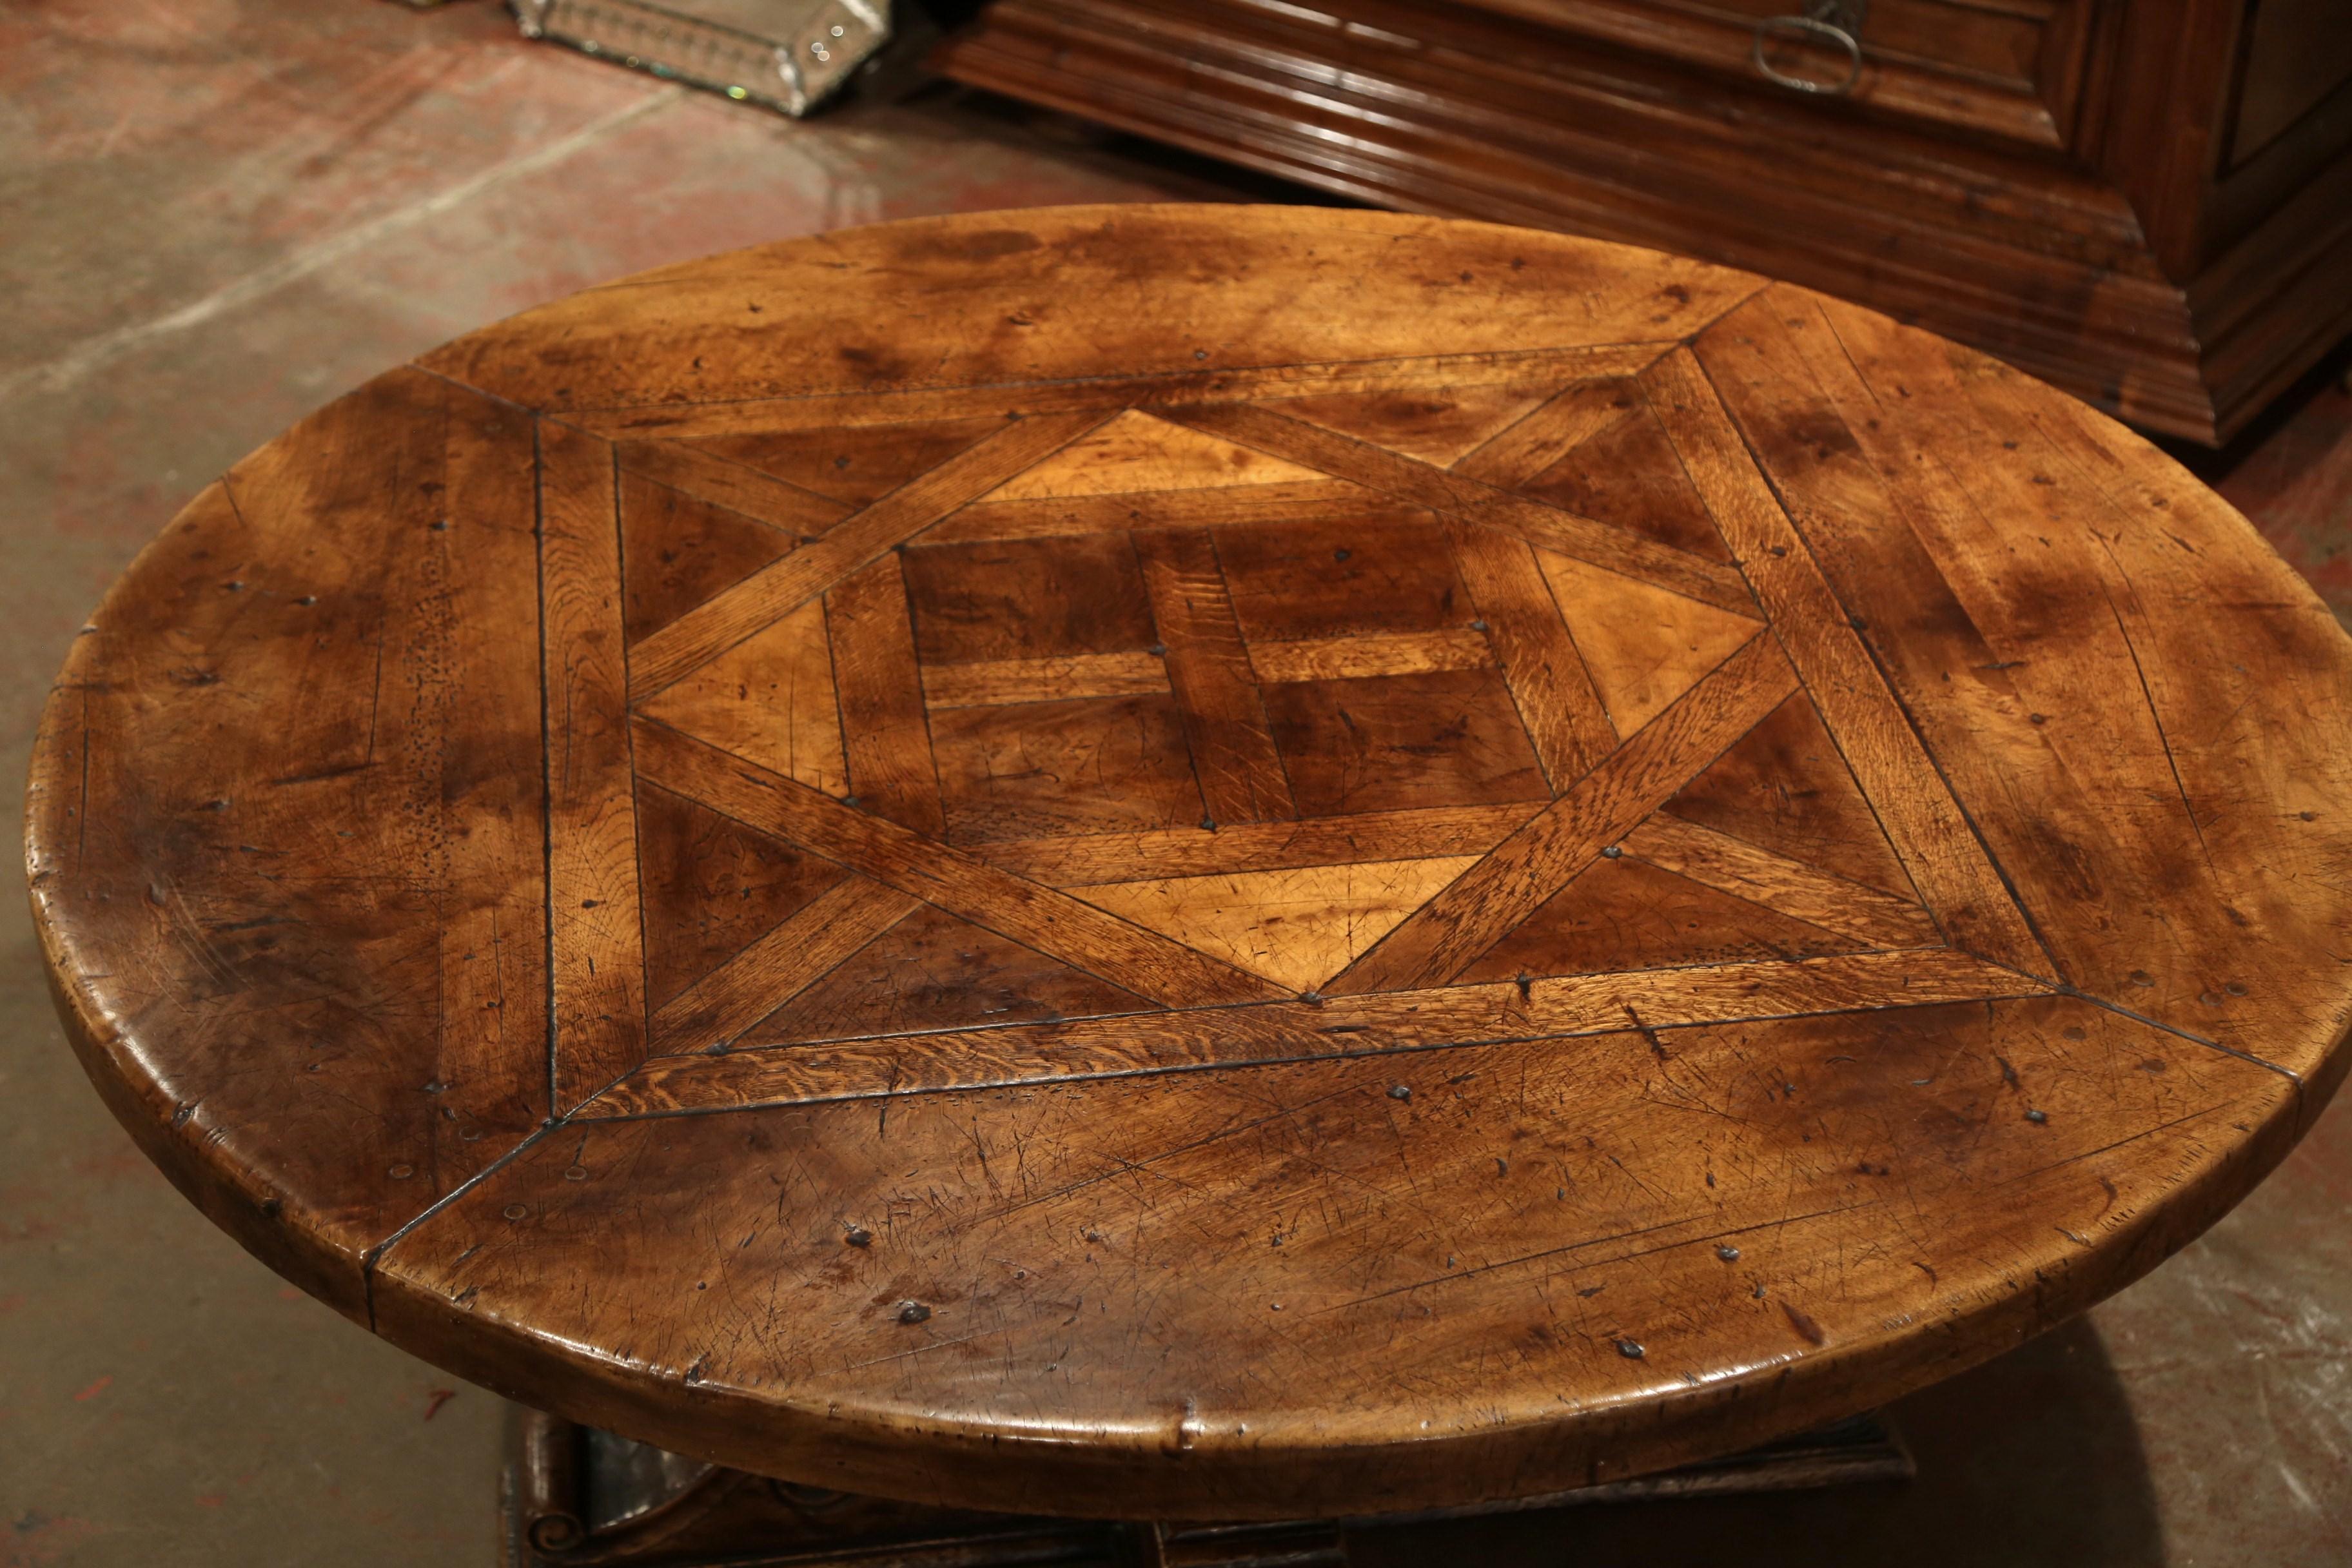 Crafted in the Pyrenees mountains of France half a century ago, the thick round surface features a parquet and geometric decor made with antique wood species, including walnut, chestnut, burl and oak. The sturdy pedestal base features four hand